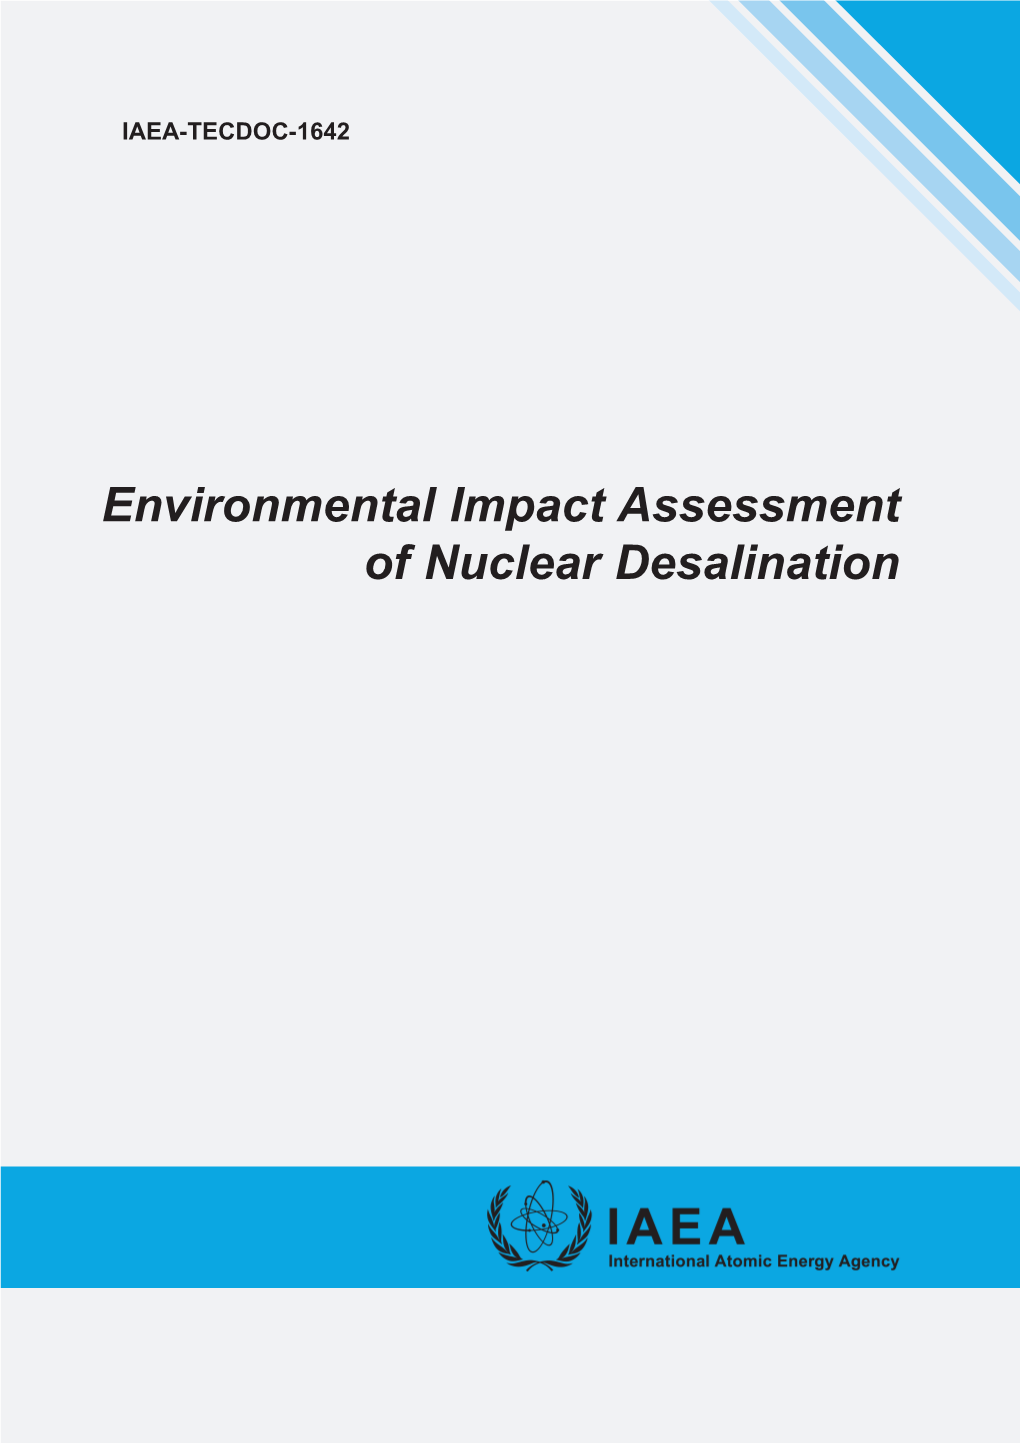 Environmental Impact Assessment of Nuclear Desalination